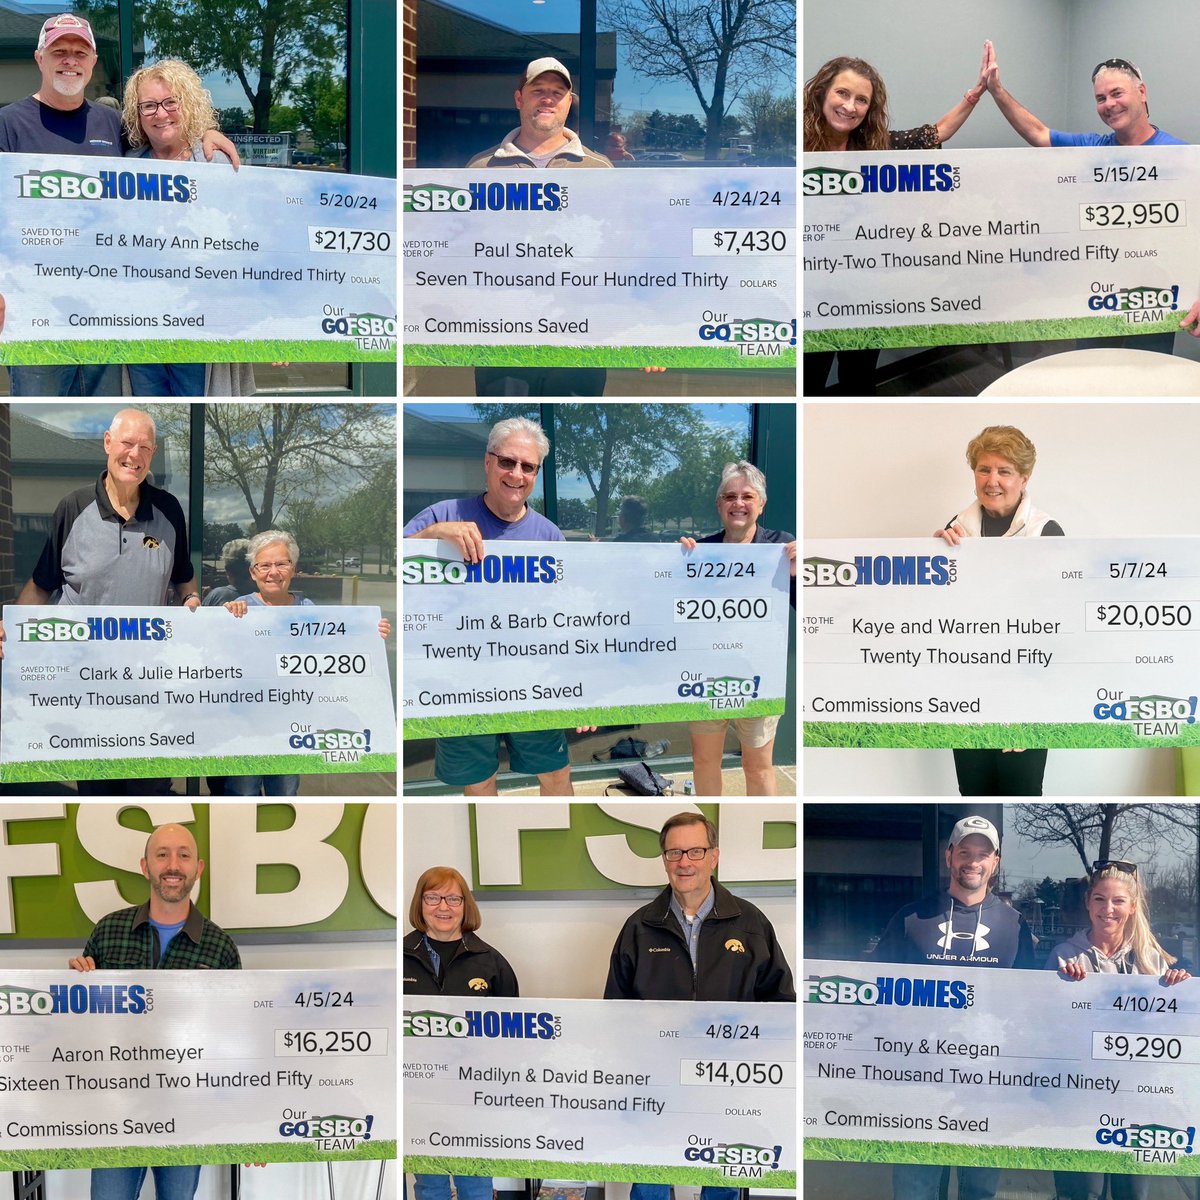 These recent customers sold and saved $154,000+ in commissions by using our services. Learn how you can save at FSBOHOMES.COM. The way selling a home should be! Congratulations! 

#thewaysellingahomeshouldbe #fsbohomescedarrapids #fsbohomescom #FSBOHOMES #realestate